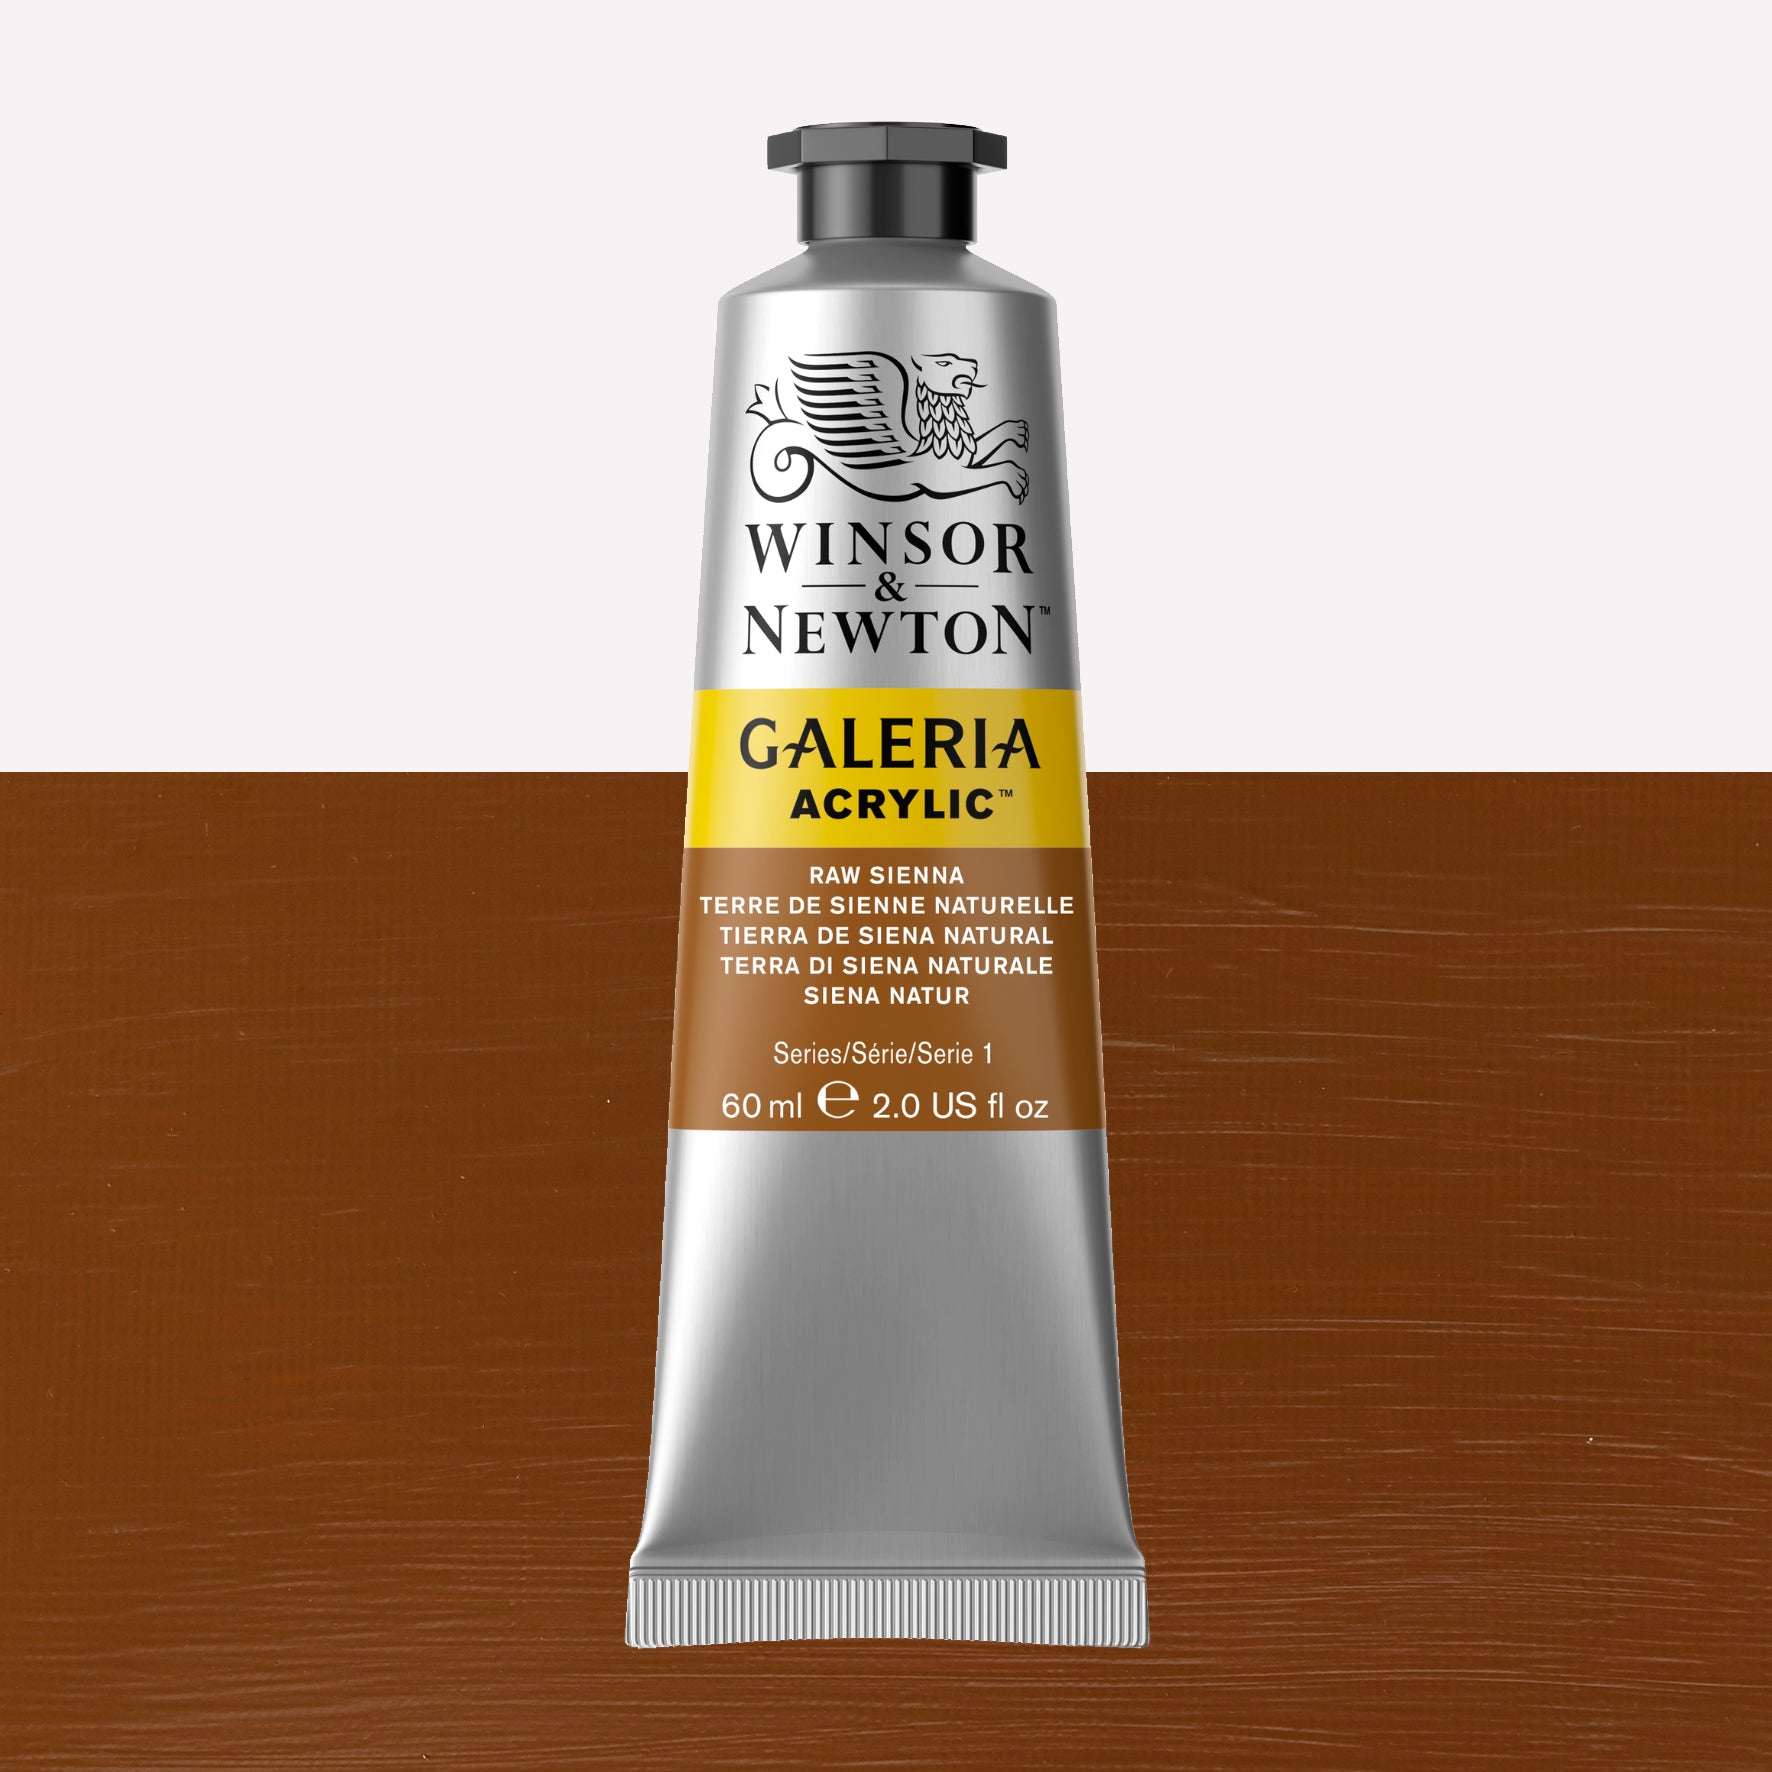 A 60ml tube of vibrant Galeria Acrylic paint in the shade Raw Sienna. This professional-quality paint is packaged in a silver tube with a black lid. Made by Winsor and Newton.